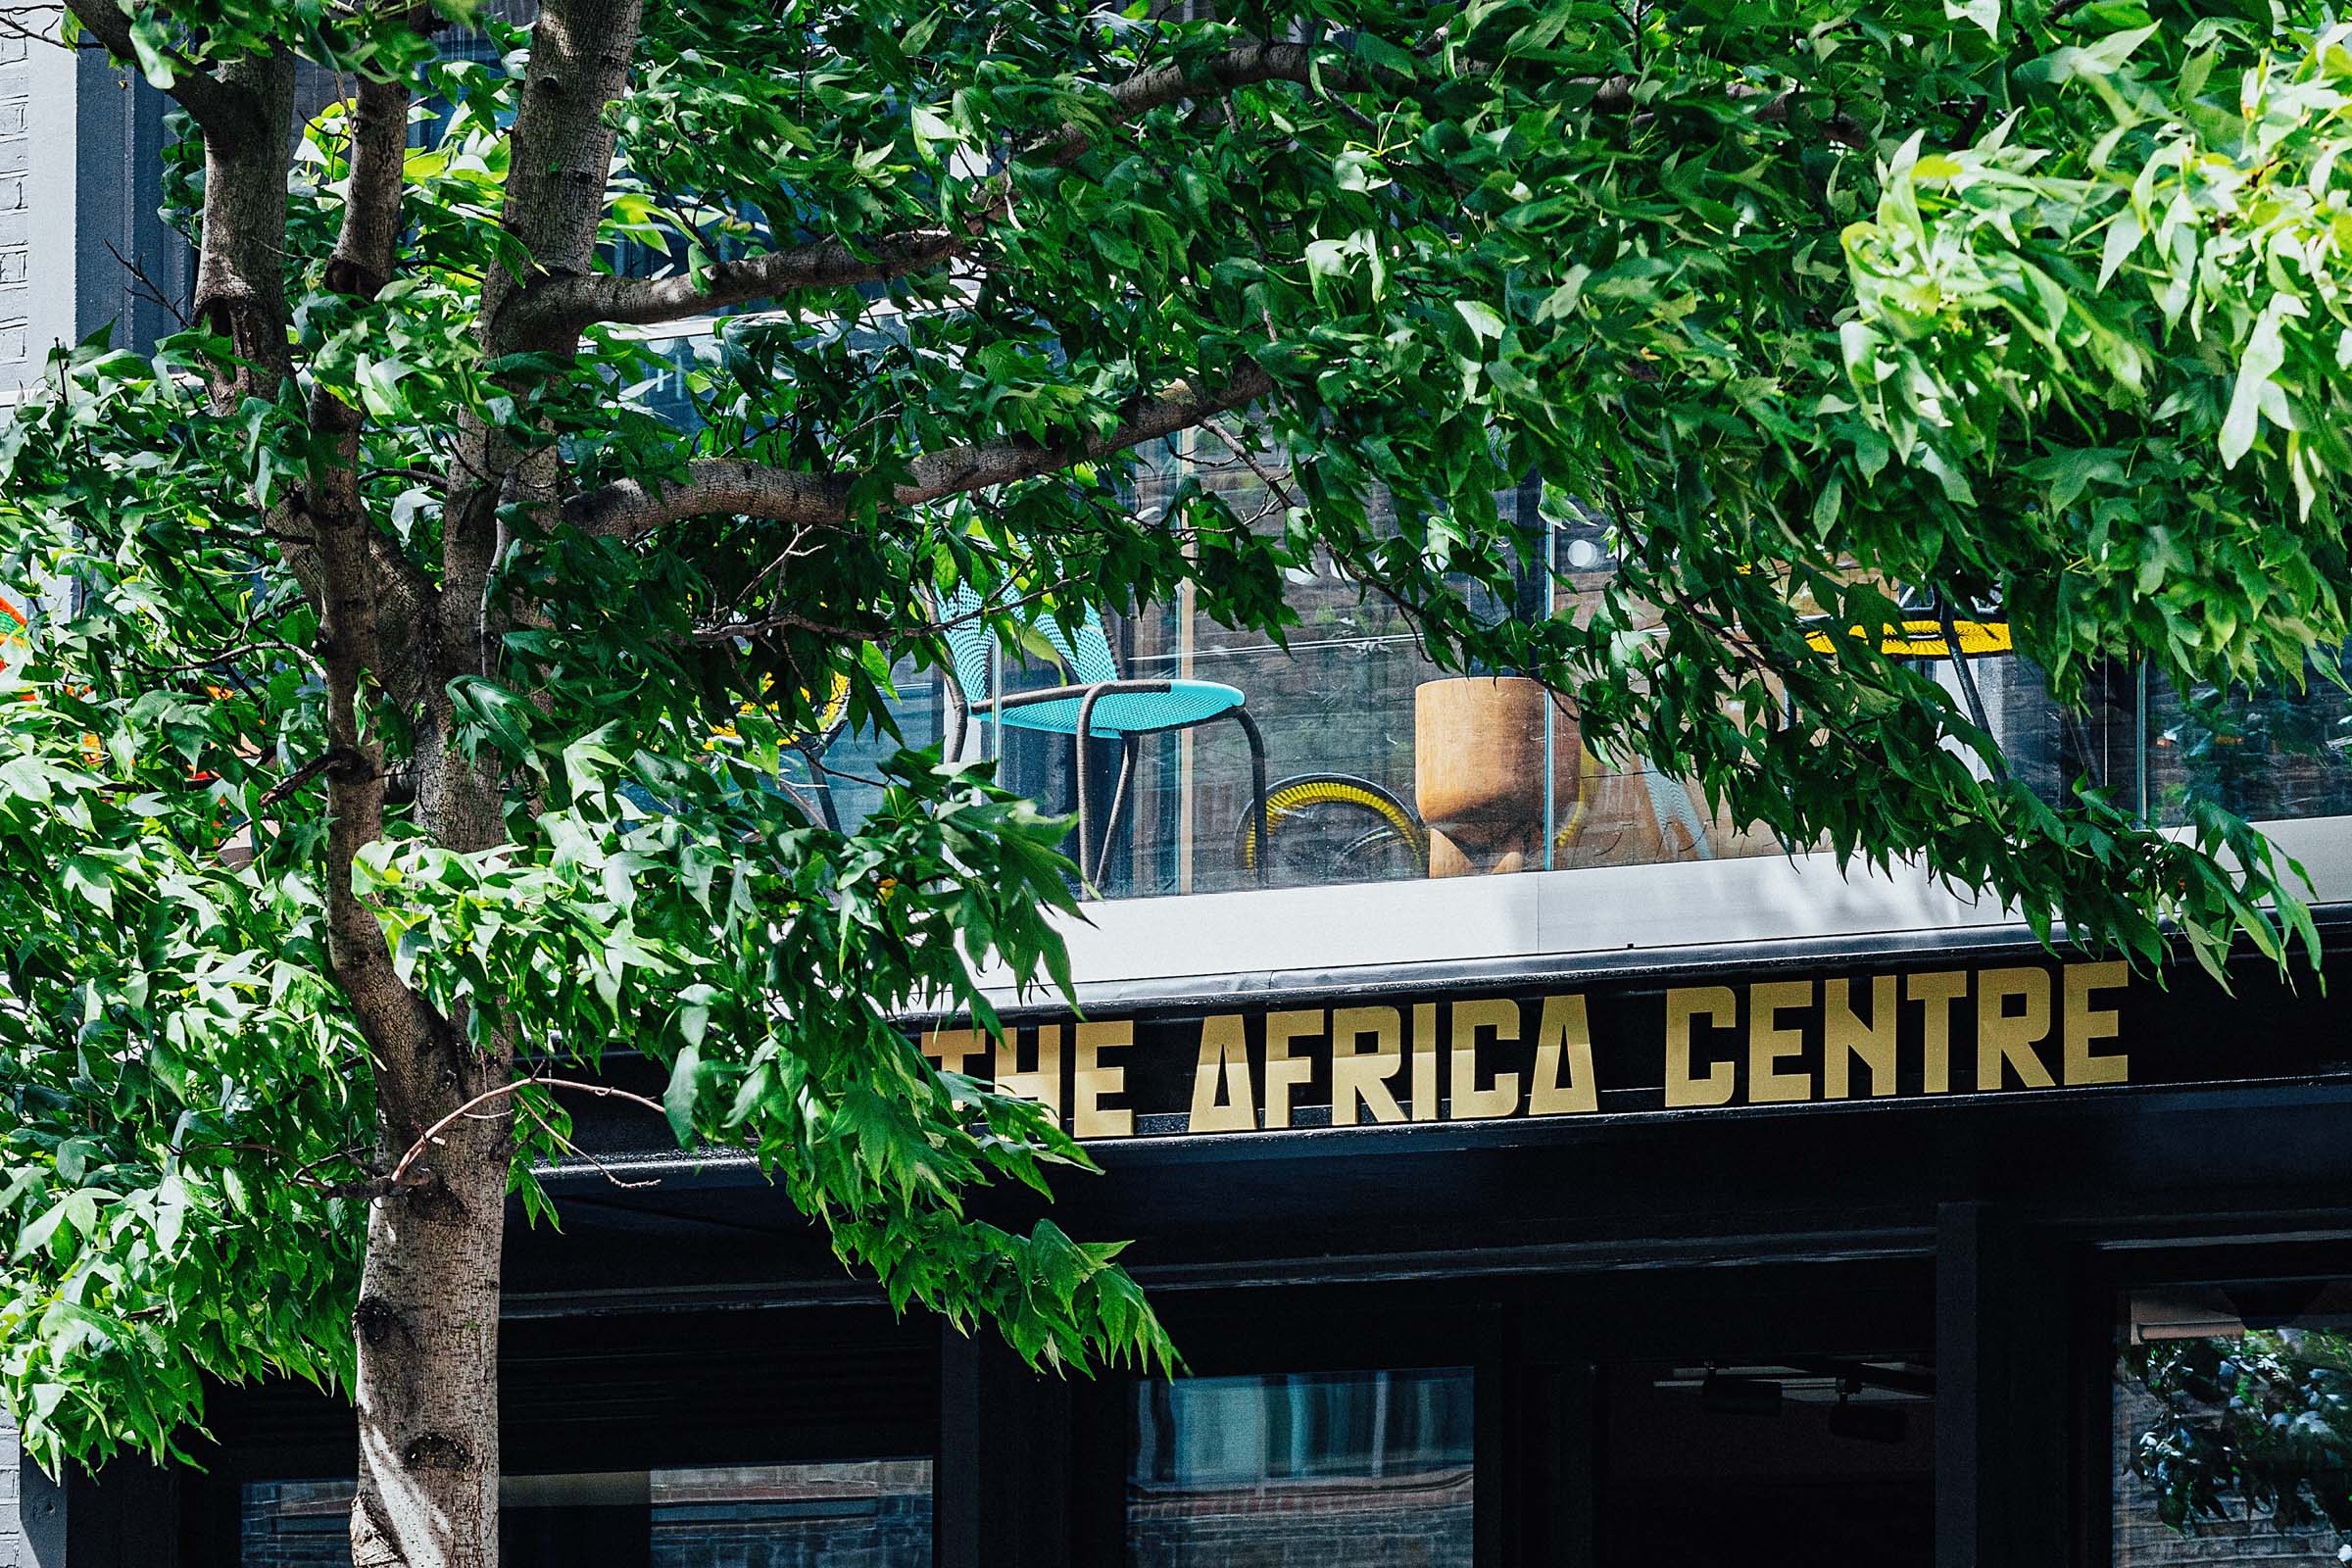 The Africa Centre